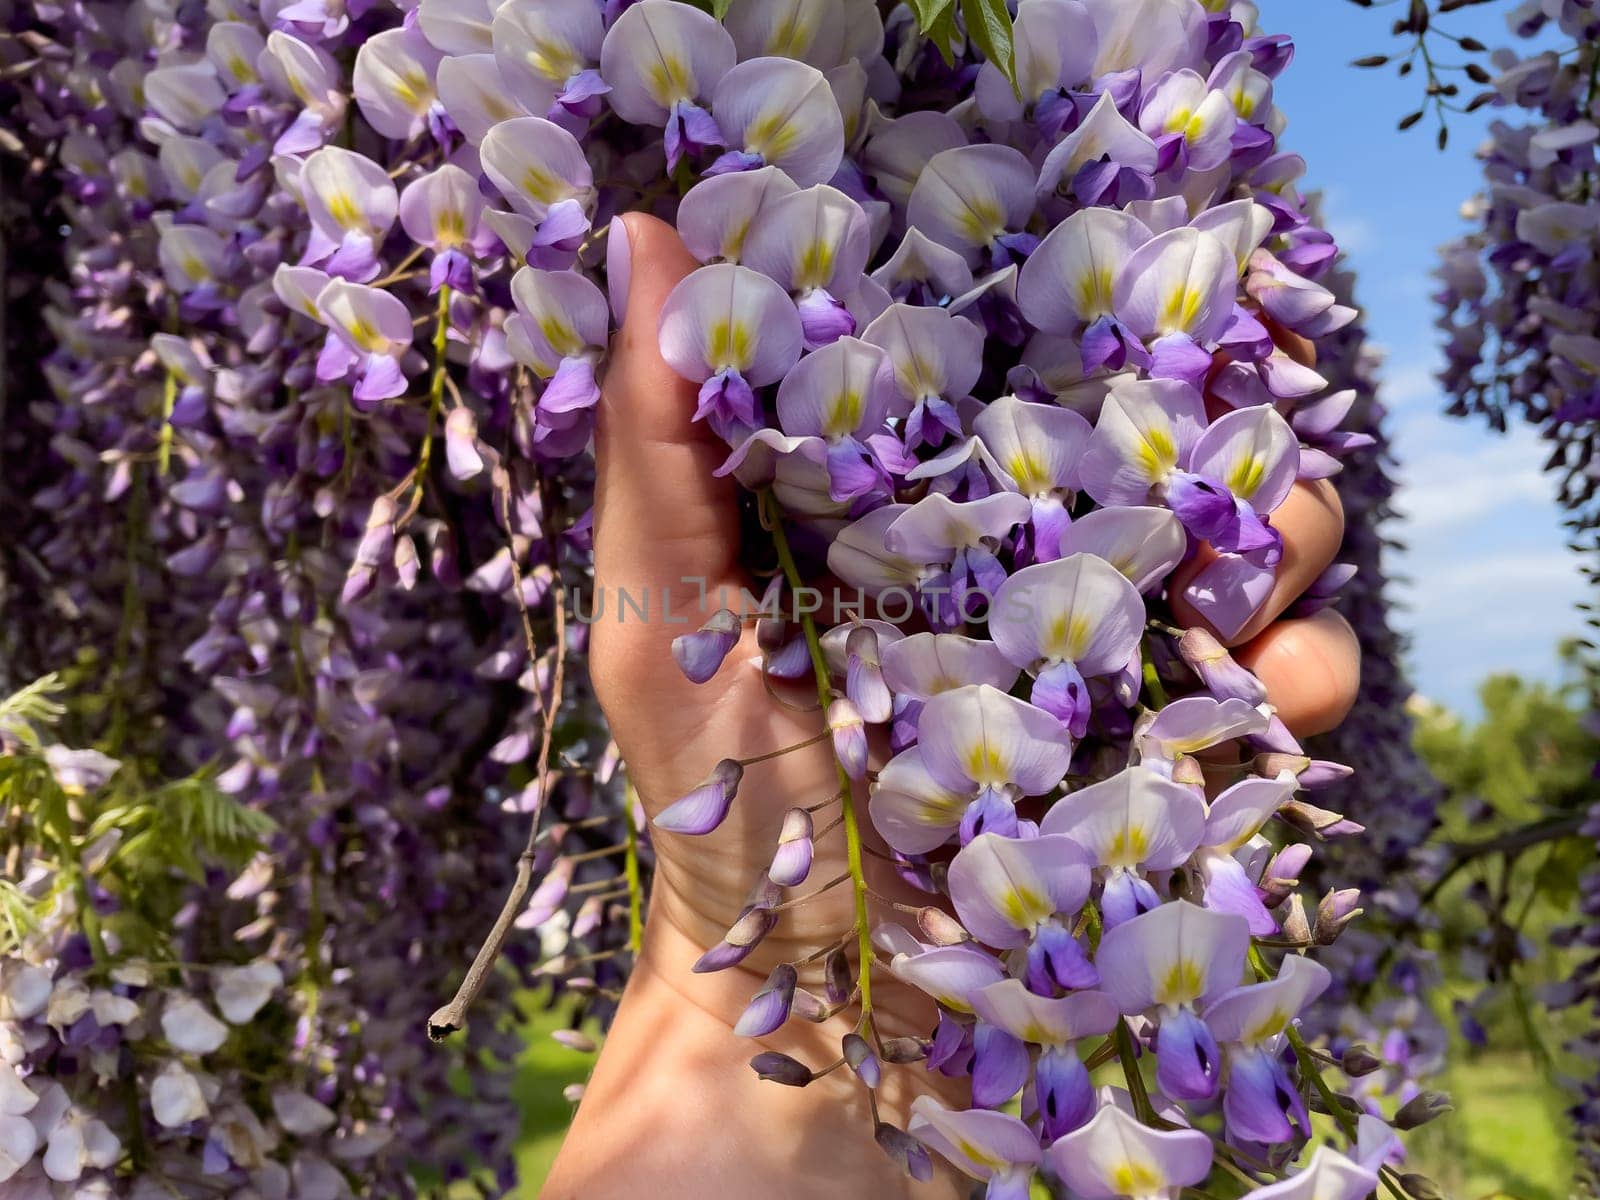 Blooming Wisteria Sinensis with scented classic purple flowersin full bloom in hanging racemes closeup. Garden with wisteria in spring by Matiunina